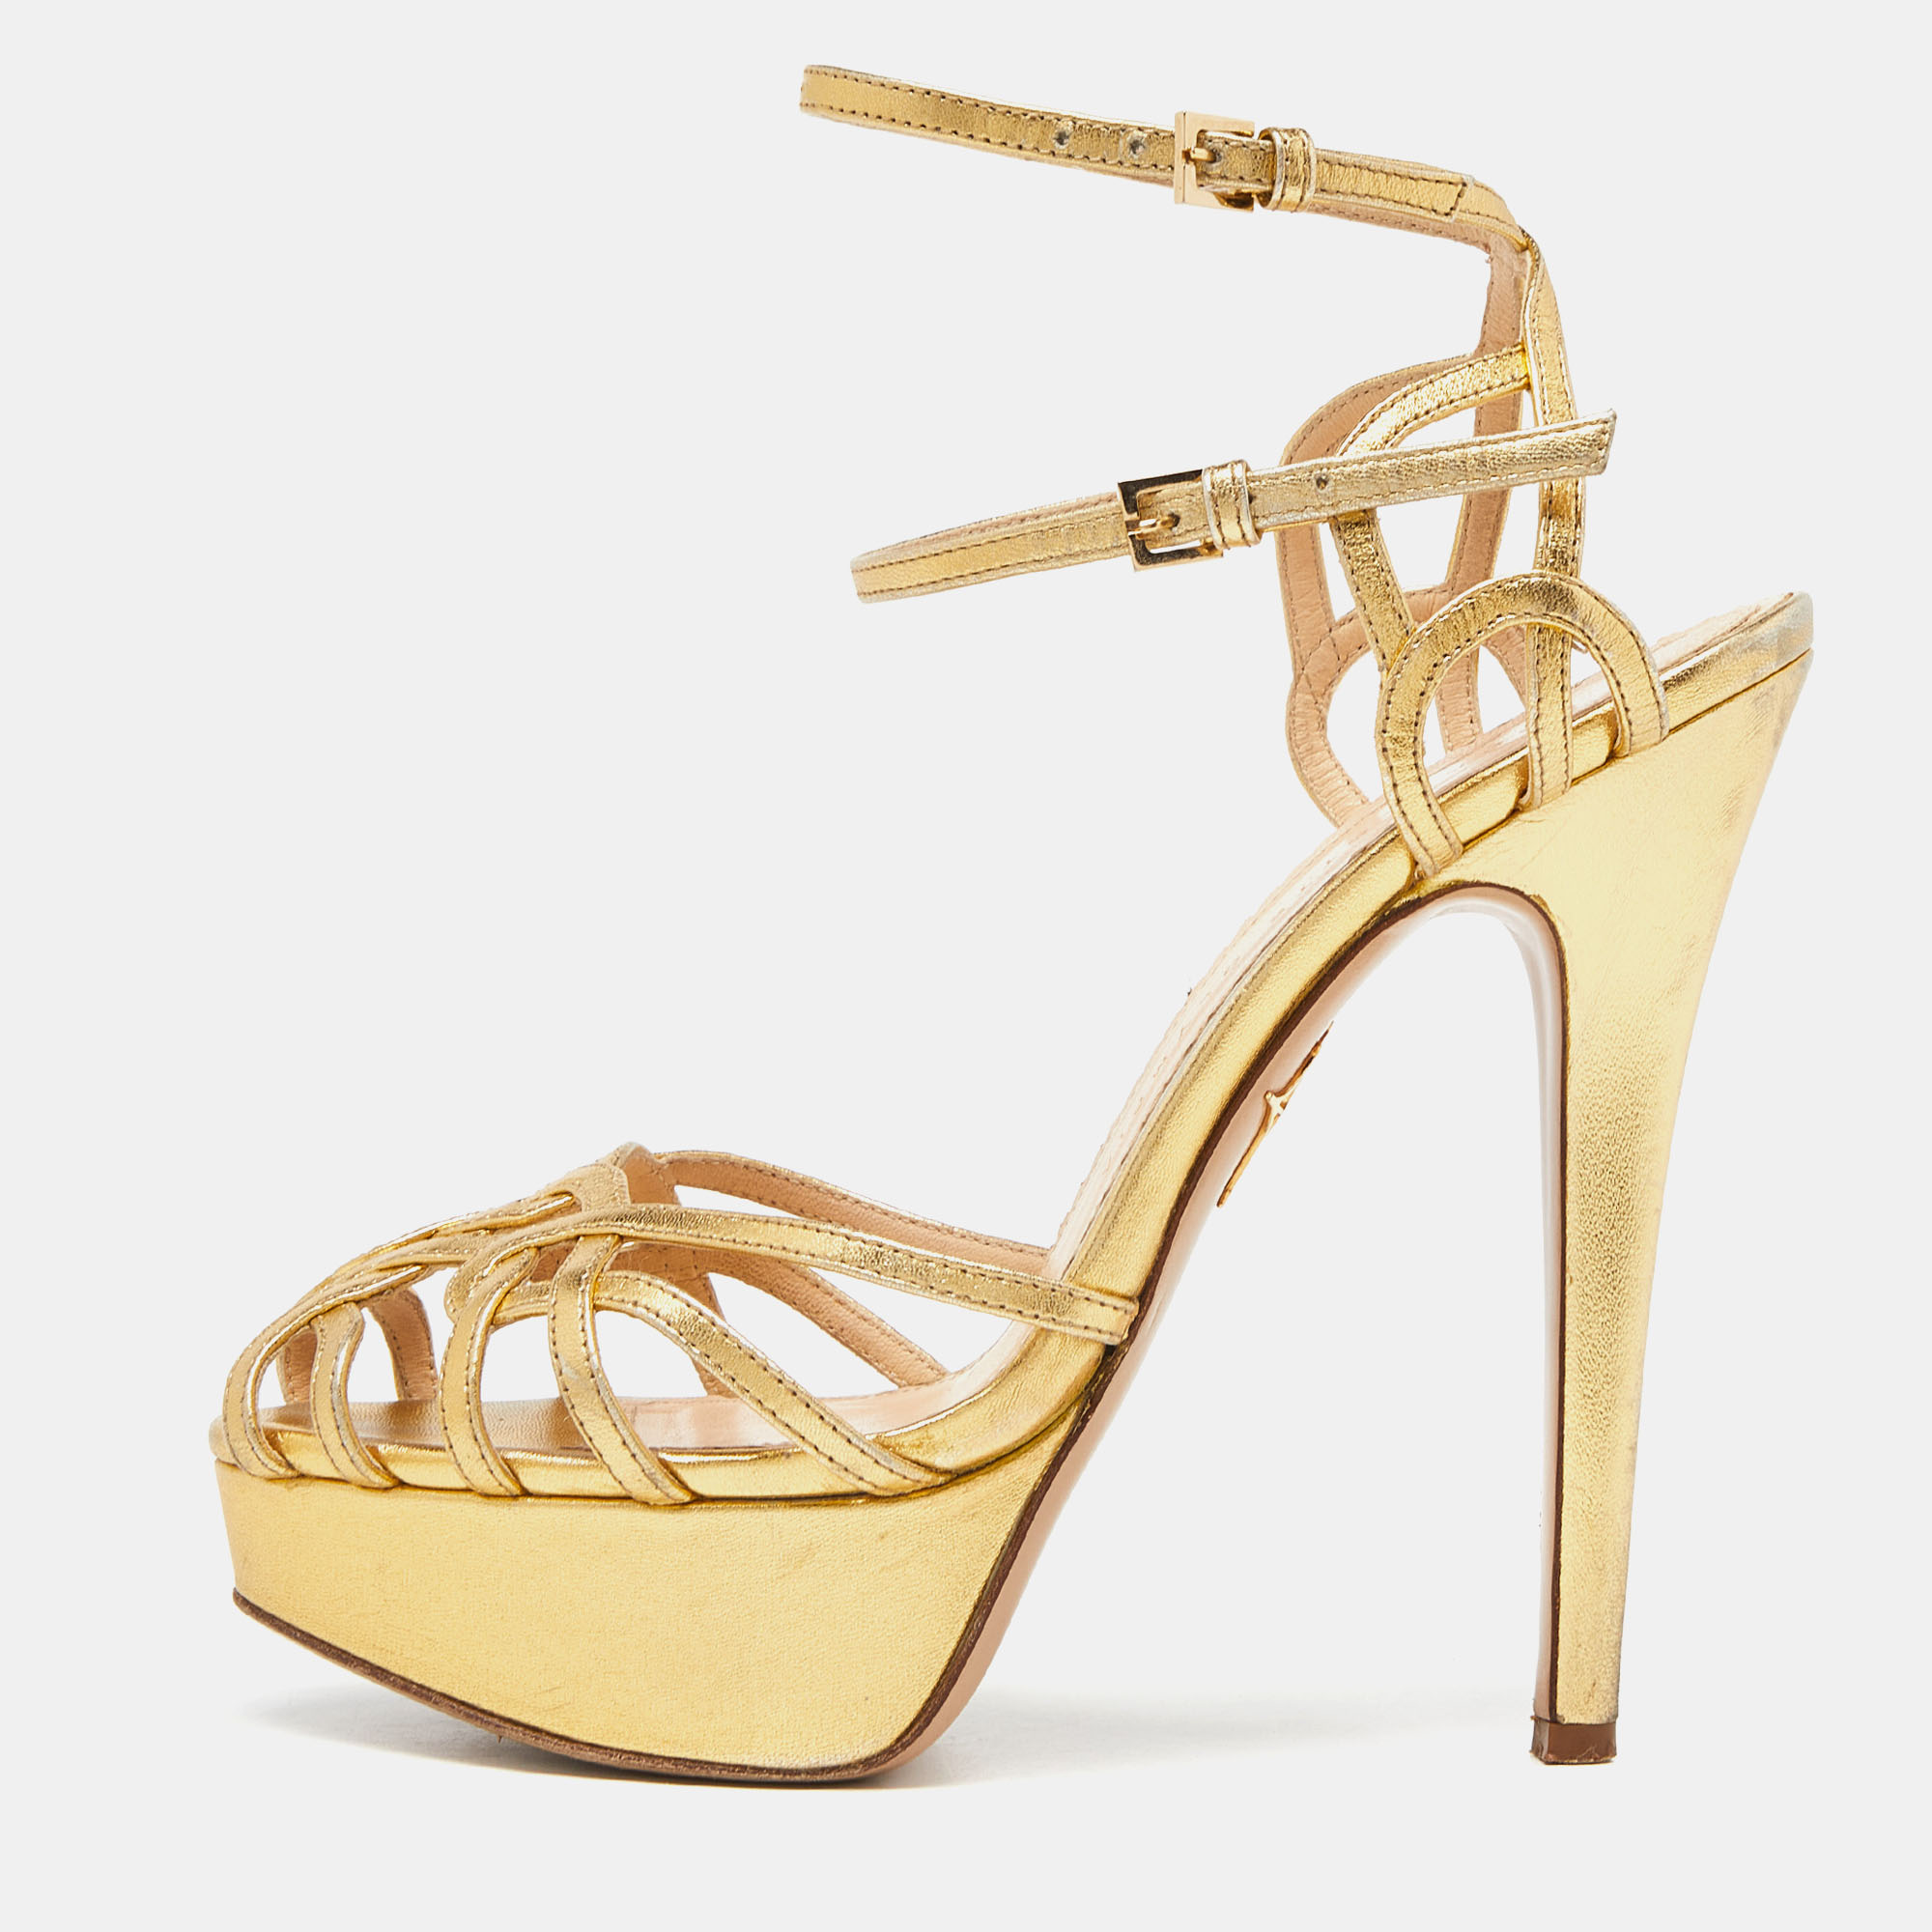 Charlotte olympia gold leather strappy platform sandals size 37.5